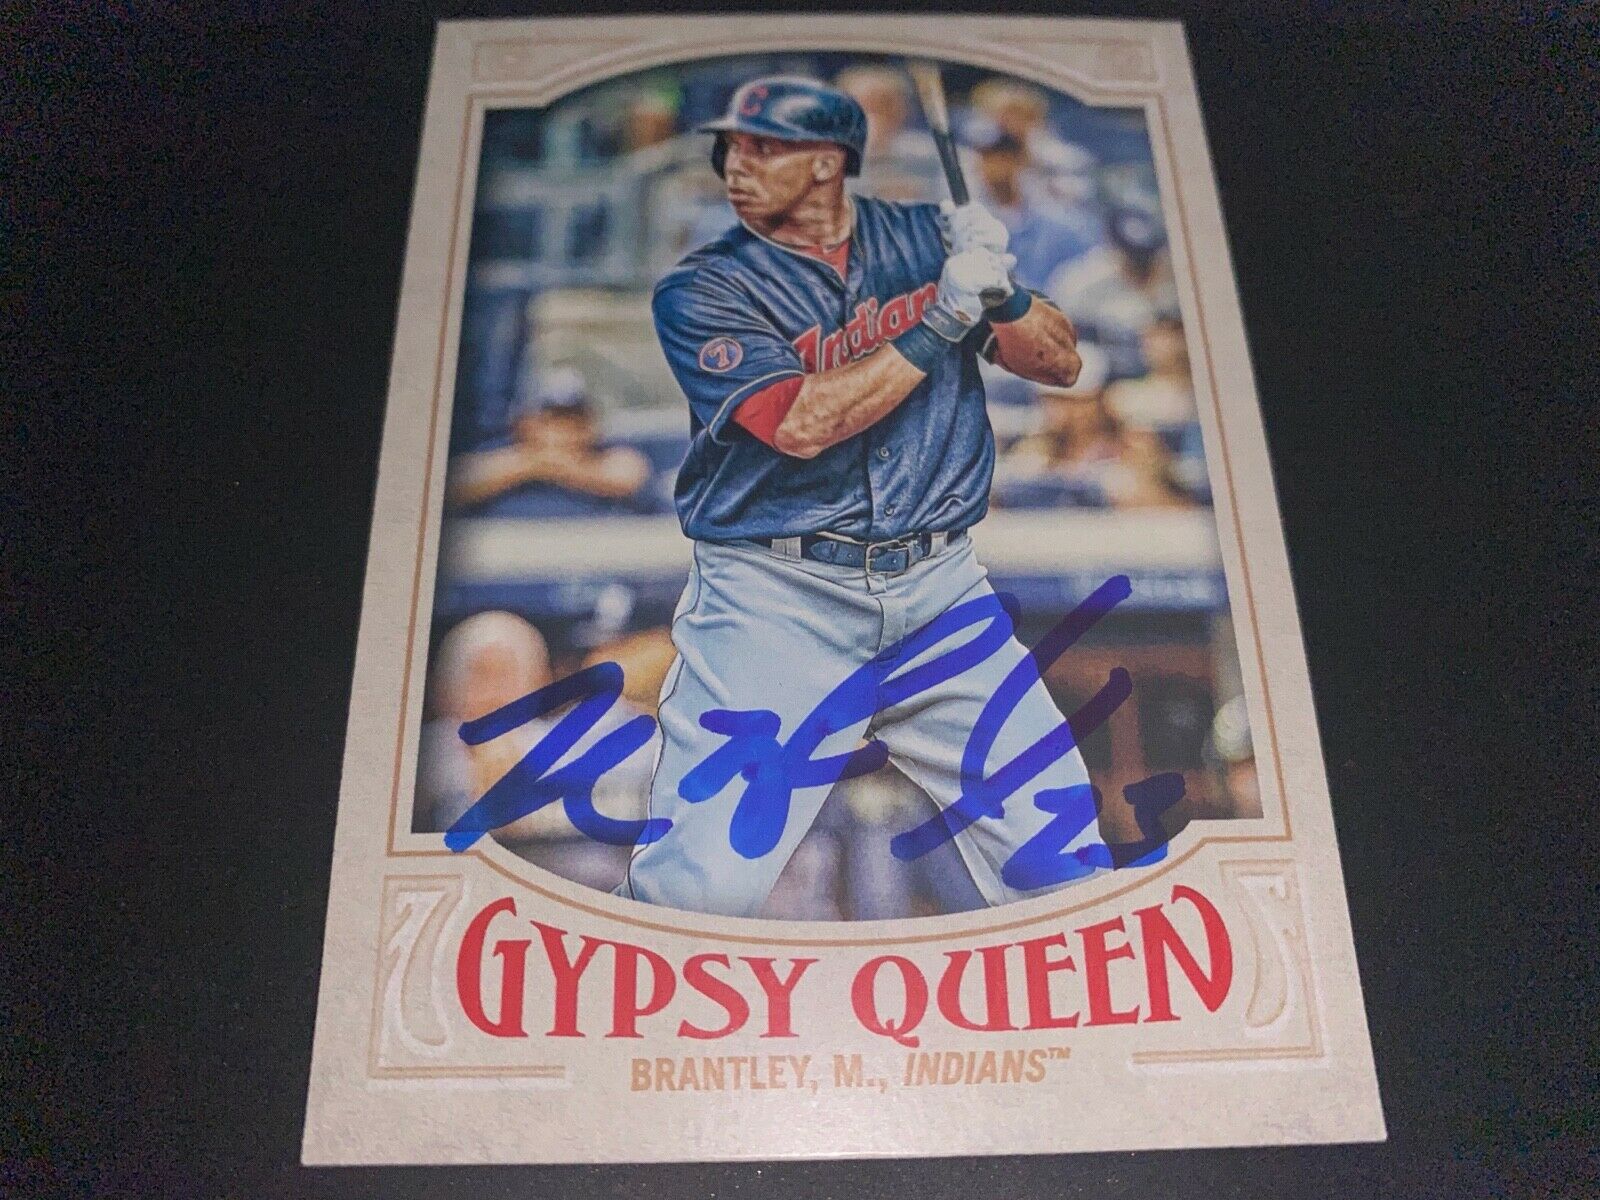 Michael Brantley Indians 2016 Autographed Signed Topps Gypsy Queen Card